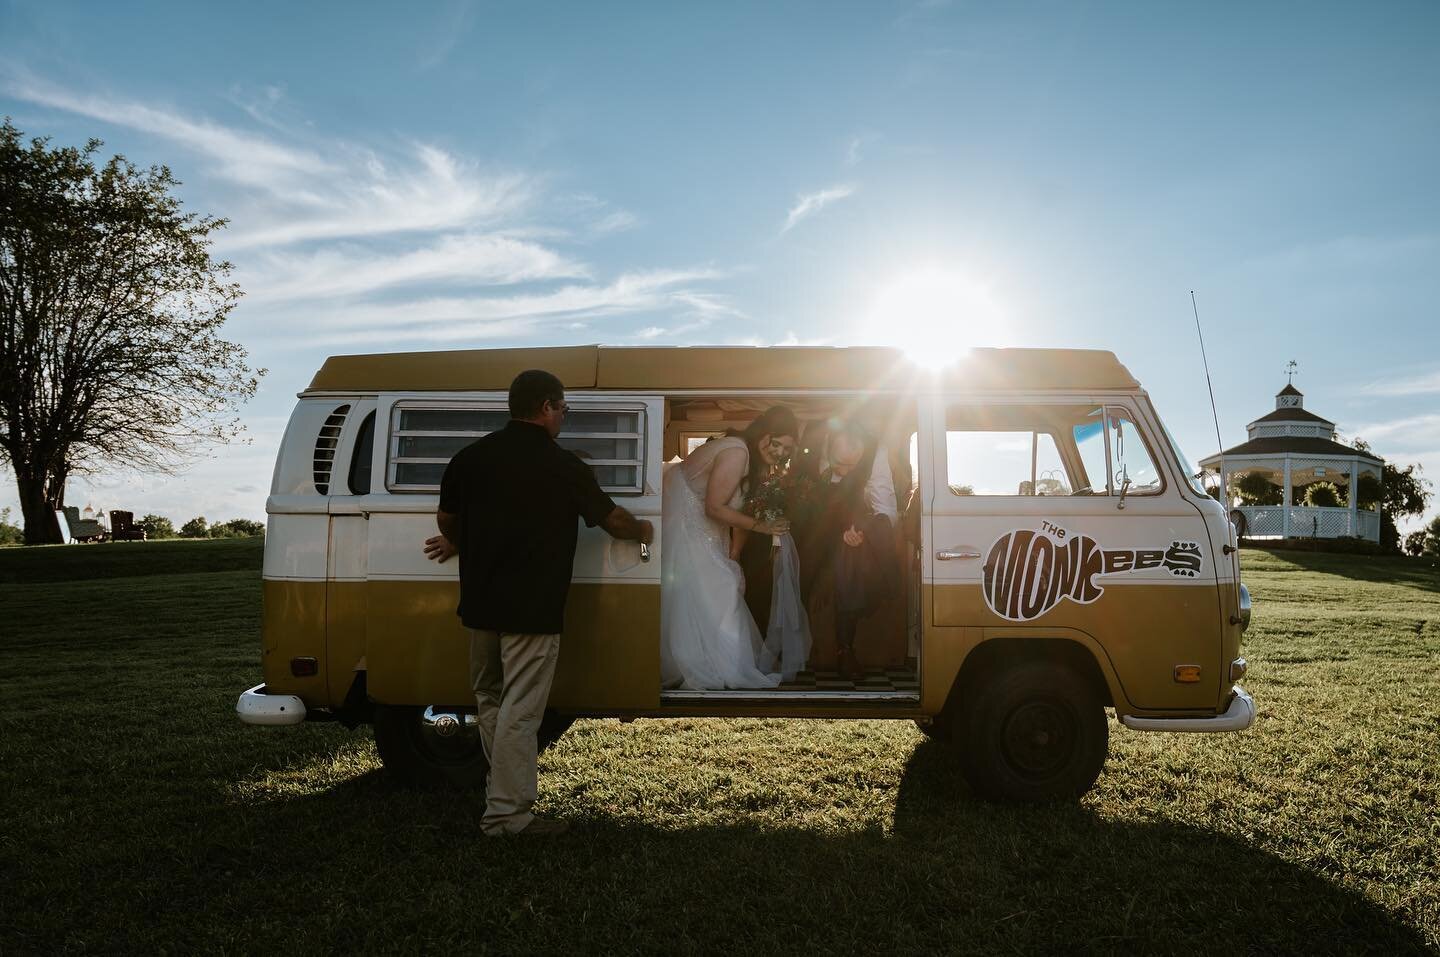 Write your own story. Dance to your own beat. And throw a celebration that&rsquo;s as unique as your love.

#cincinnatiweddingphotographer #kentuckyweddingphotographer #lovestory #uniquewedding #vwbuslove